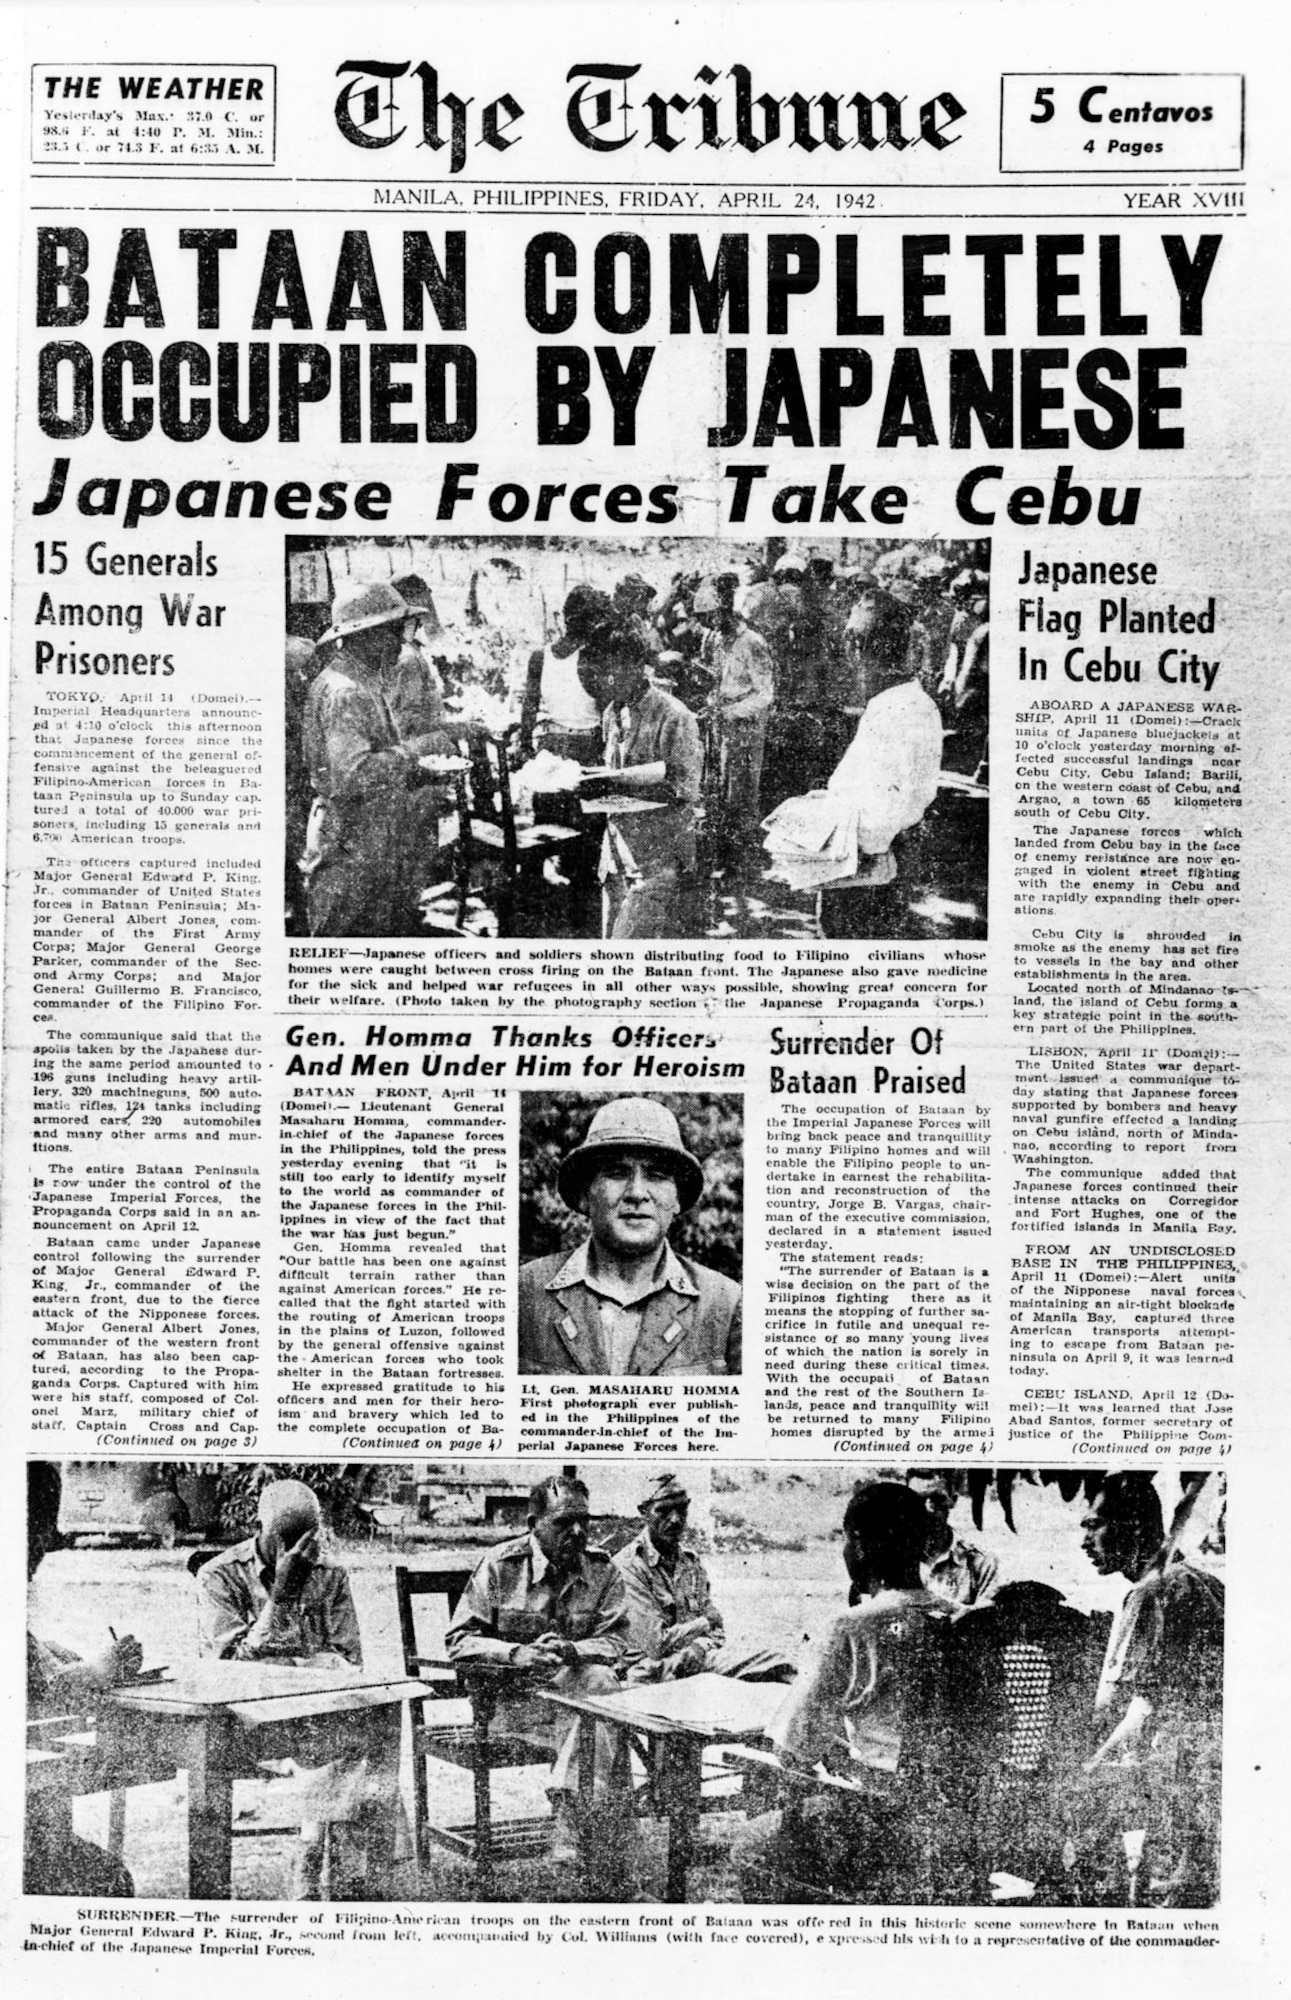 The invading Japanese controlled the Philippine media, which portrayed imperial forces as helpful liberators. In reality, the Japanese were committing brutal war crimes like the Death March. This front page claims that Japanese occupation will bring “peace and tranquility” to the Philippines. (U.S. Air Force photo)